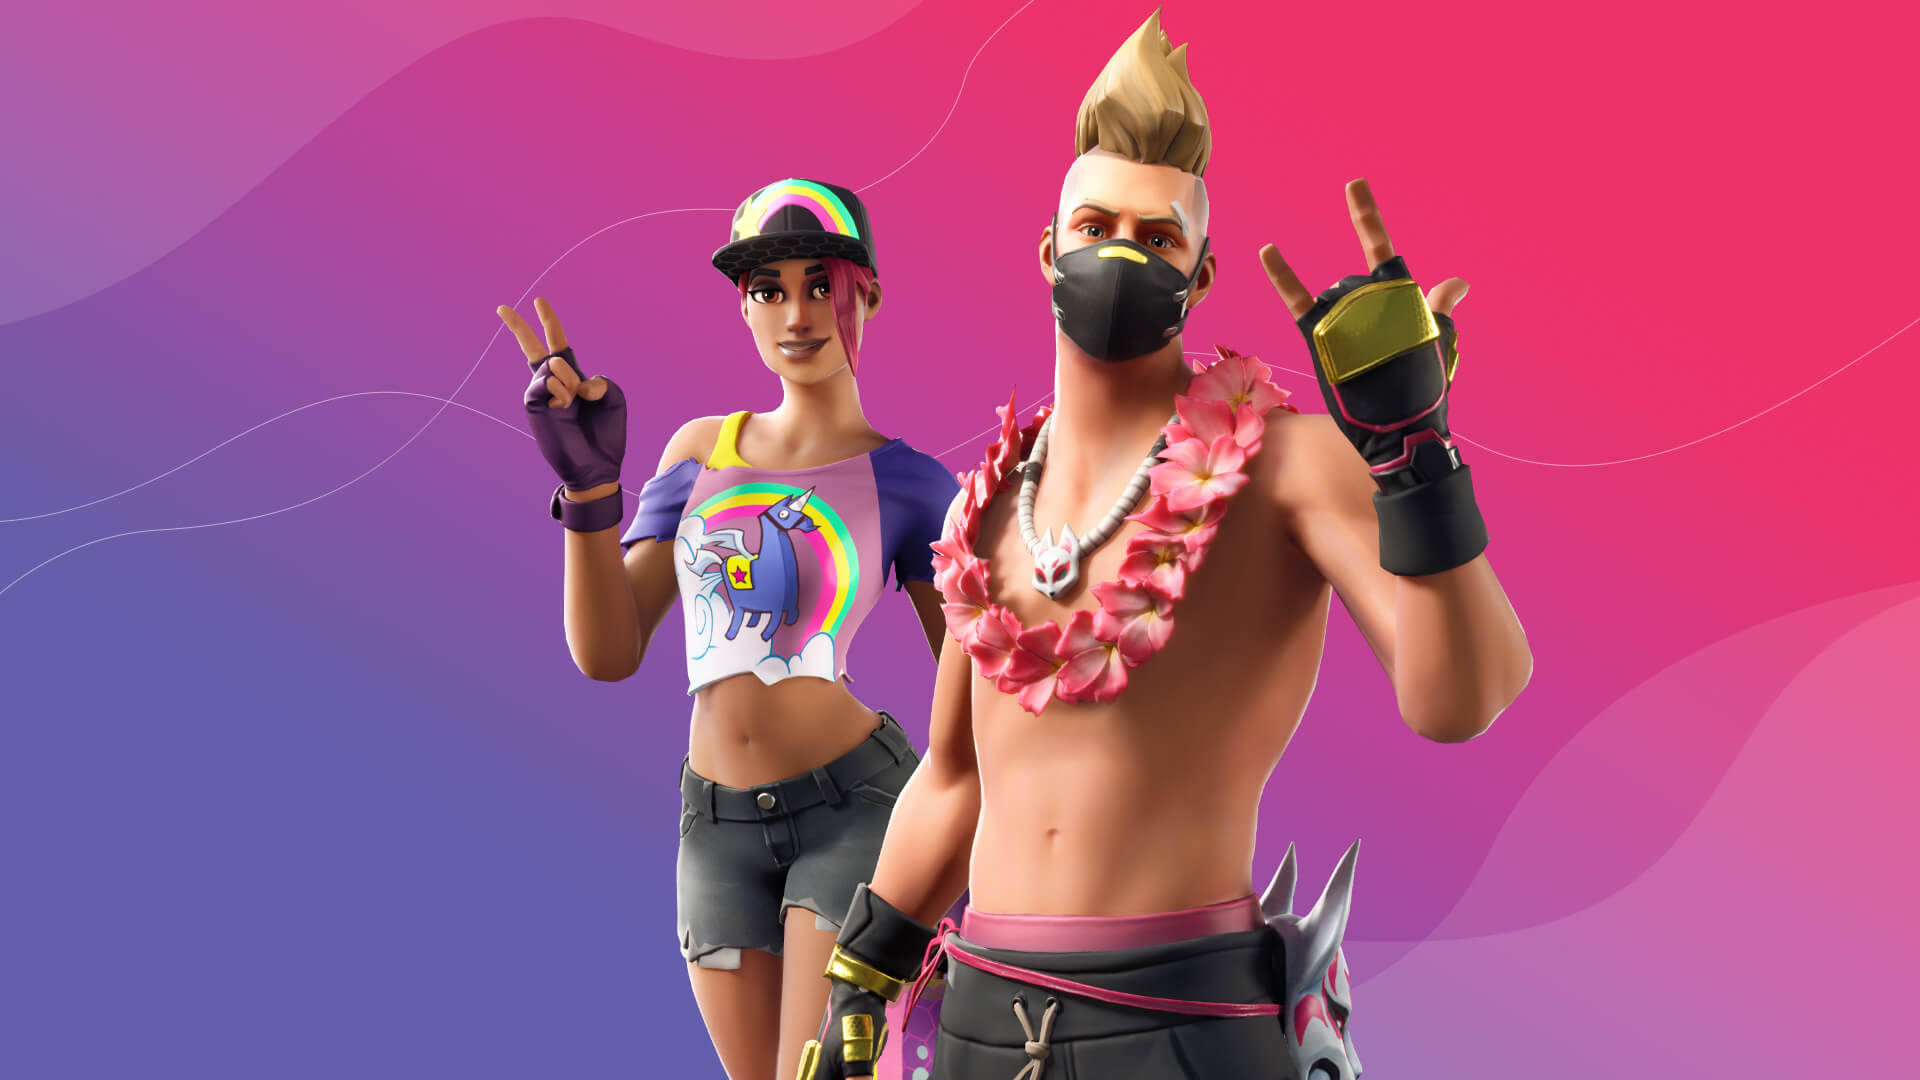 Persona Pronounce Planet Download Drift Fortnite And Brite Bomber Wallpaper | Wallpapers.com